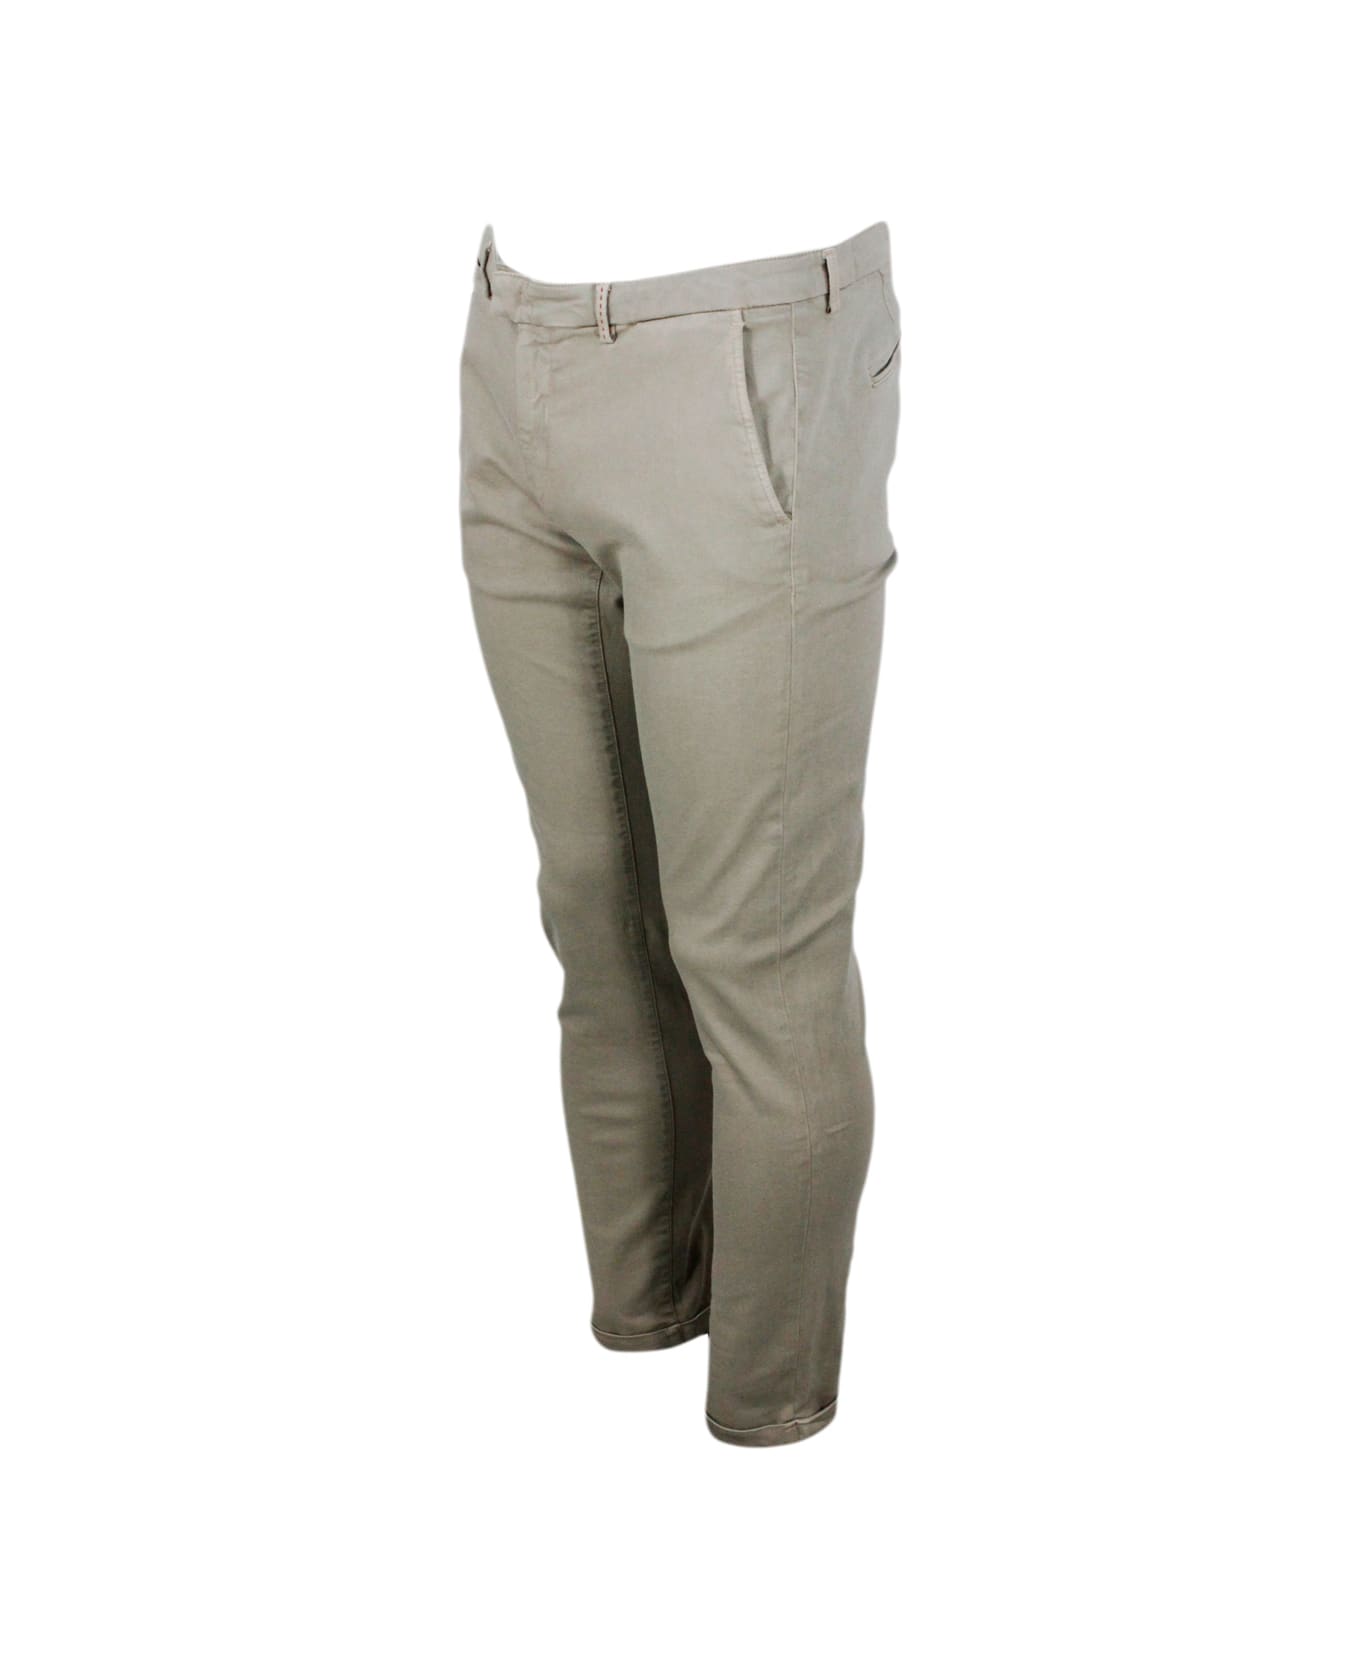 Sartoria Tramarossa Luis Trousers With Chino Pockets In Stretch Elastic Cotton With Tone-on-tone Sartorial Stitching And Leather Label Zip Closure - Sand Beige